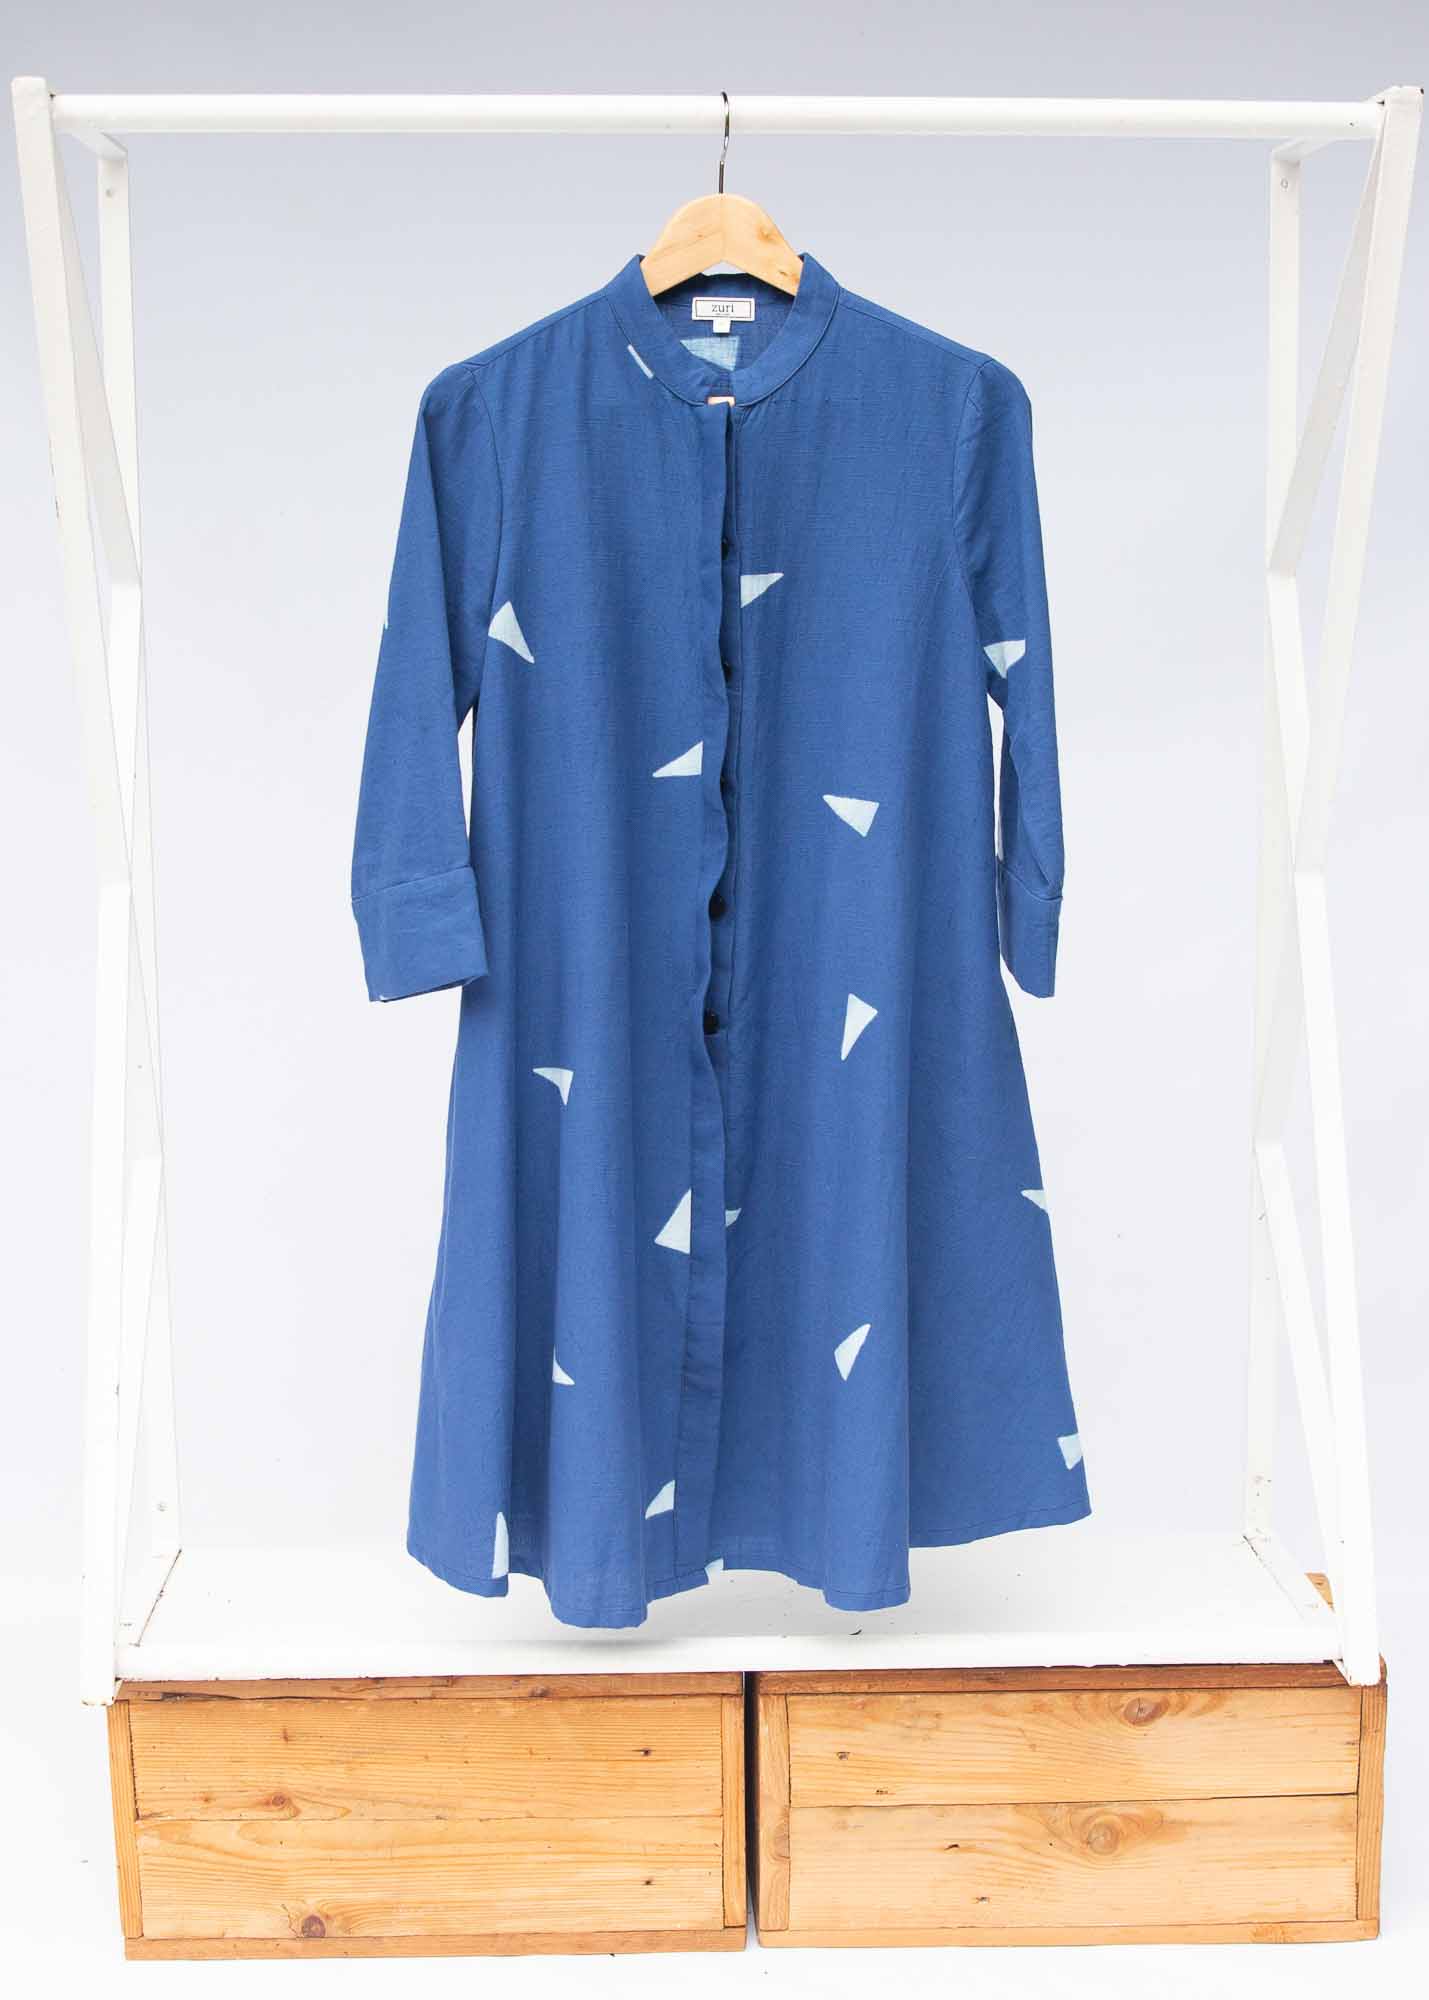 The display of blue sold dress with white triangles